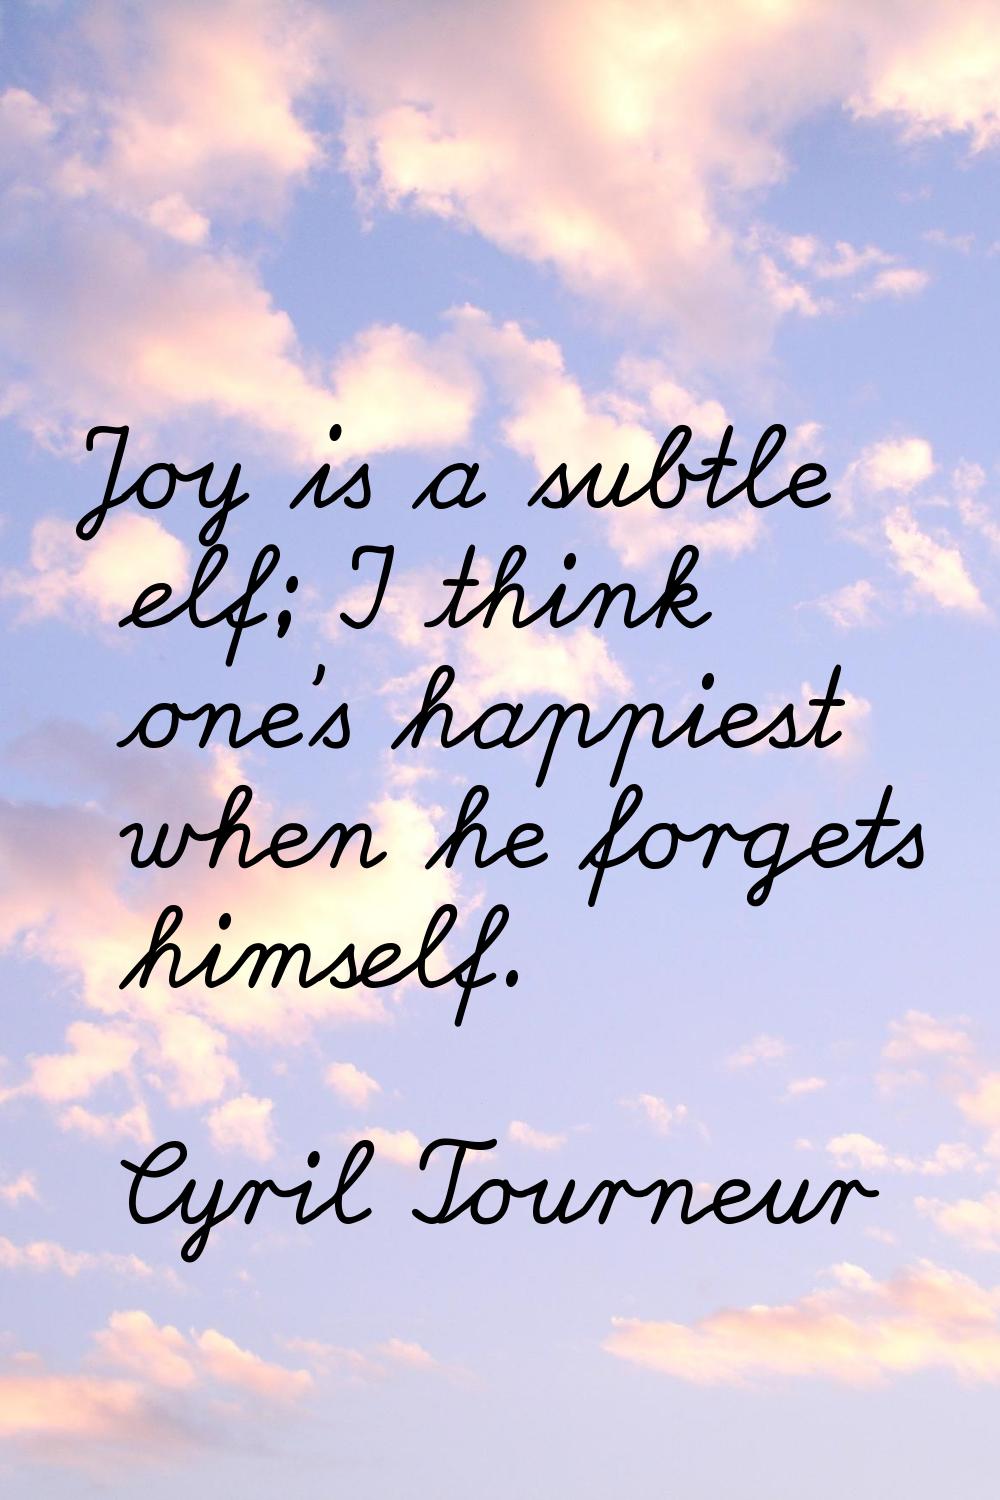 Joy is a subtle elf; I think one's happiest when he forgets himself.